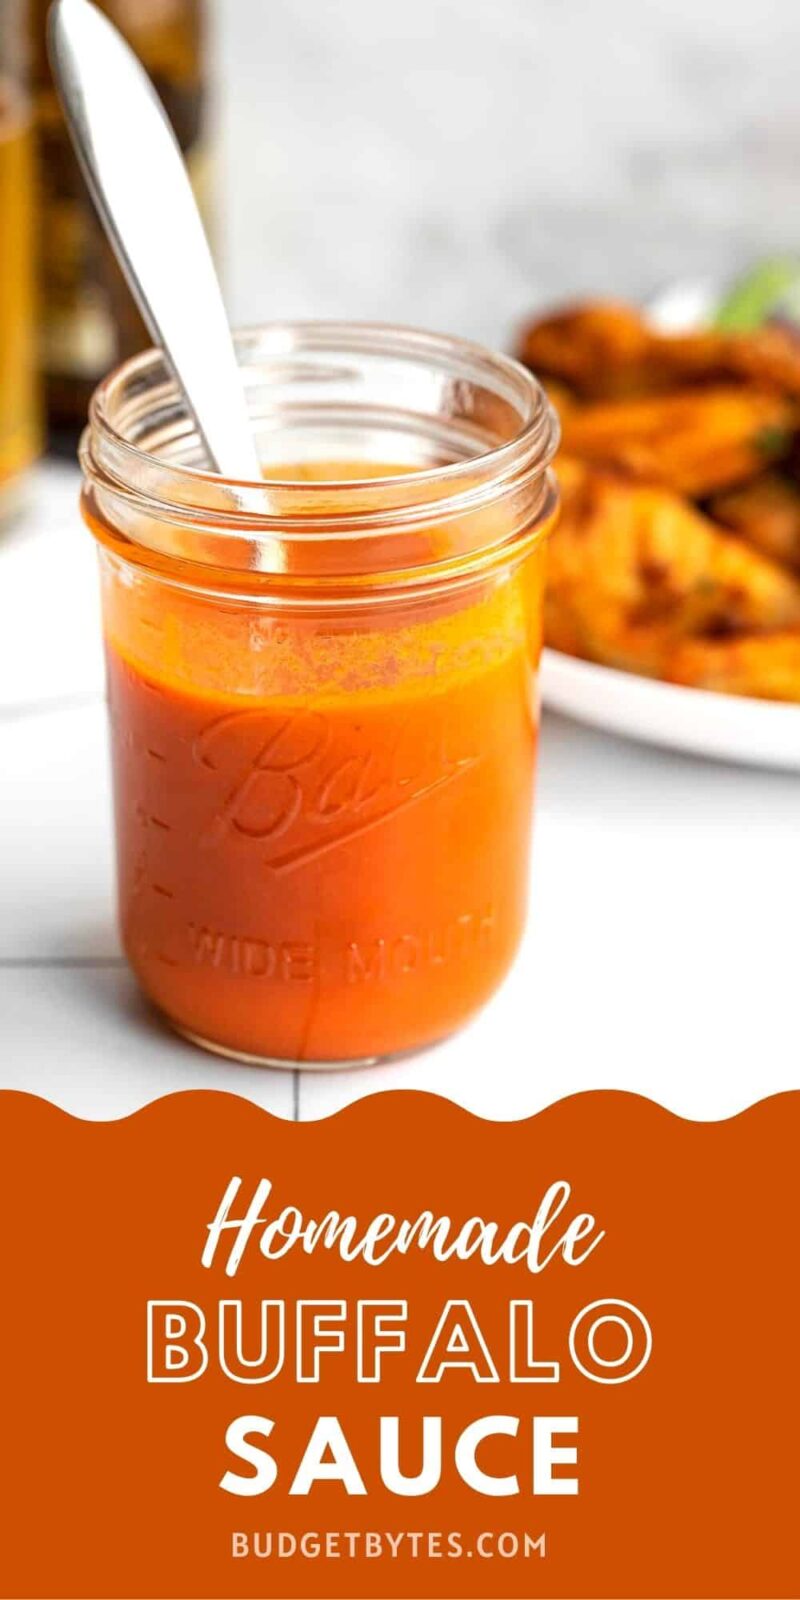 buffalo sauce in a jar, title text at the bottom